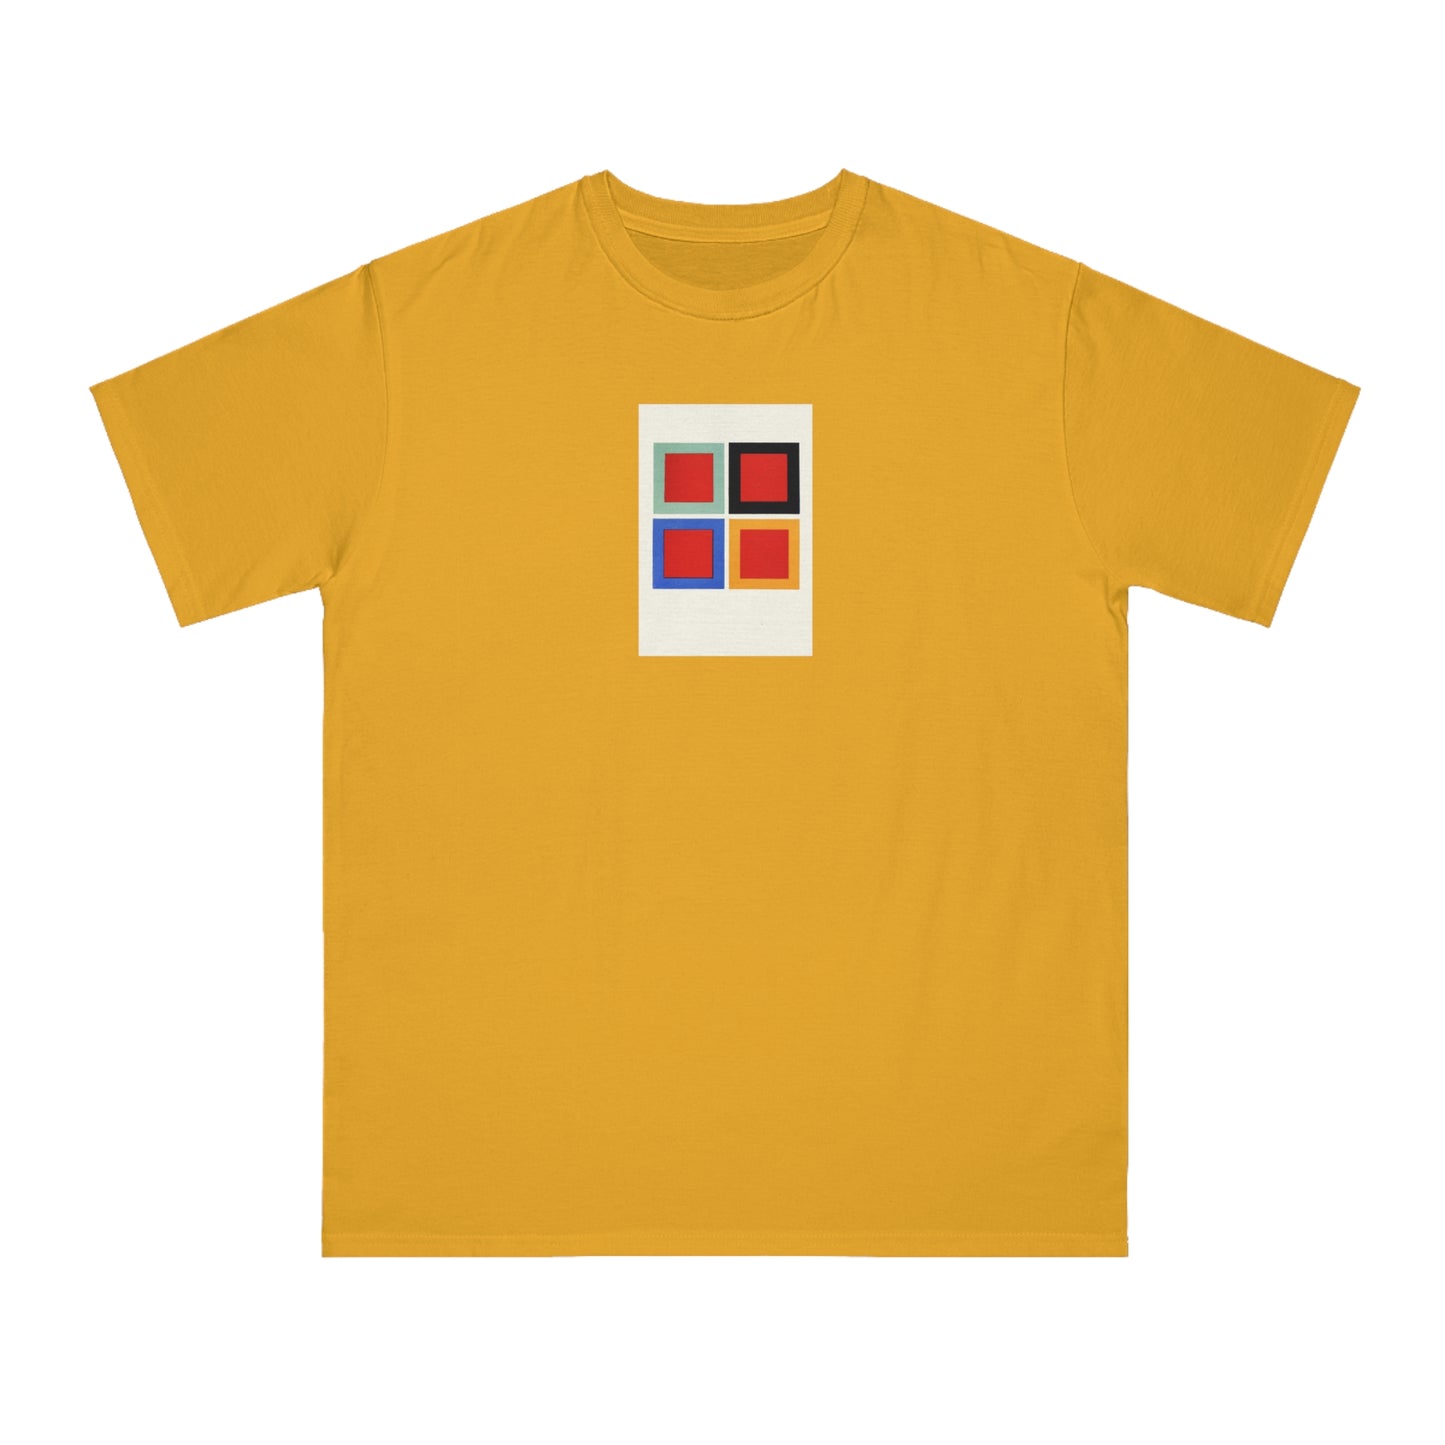 a yellow t - shirt with a red and blue square on it